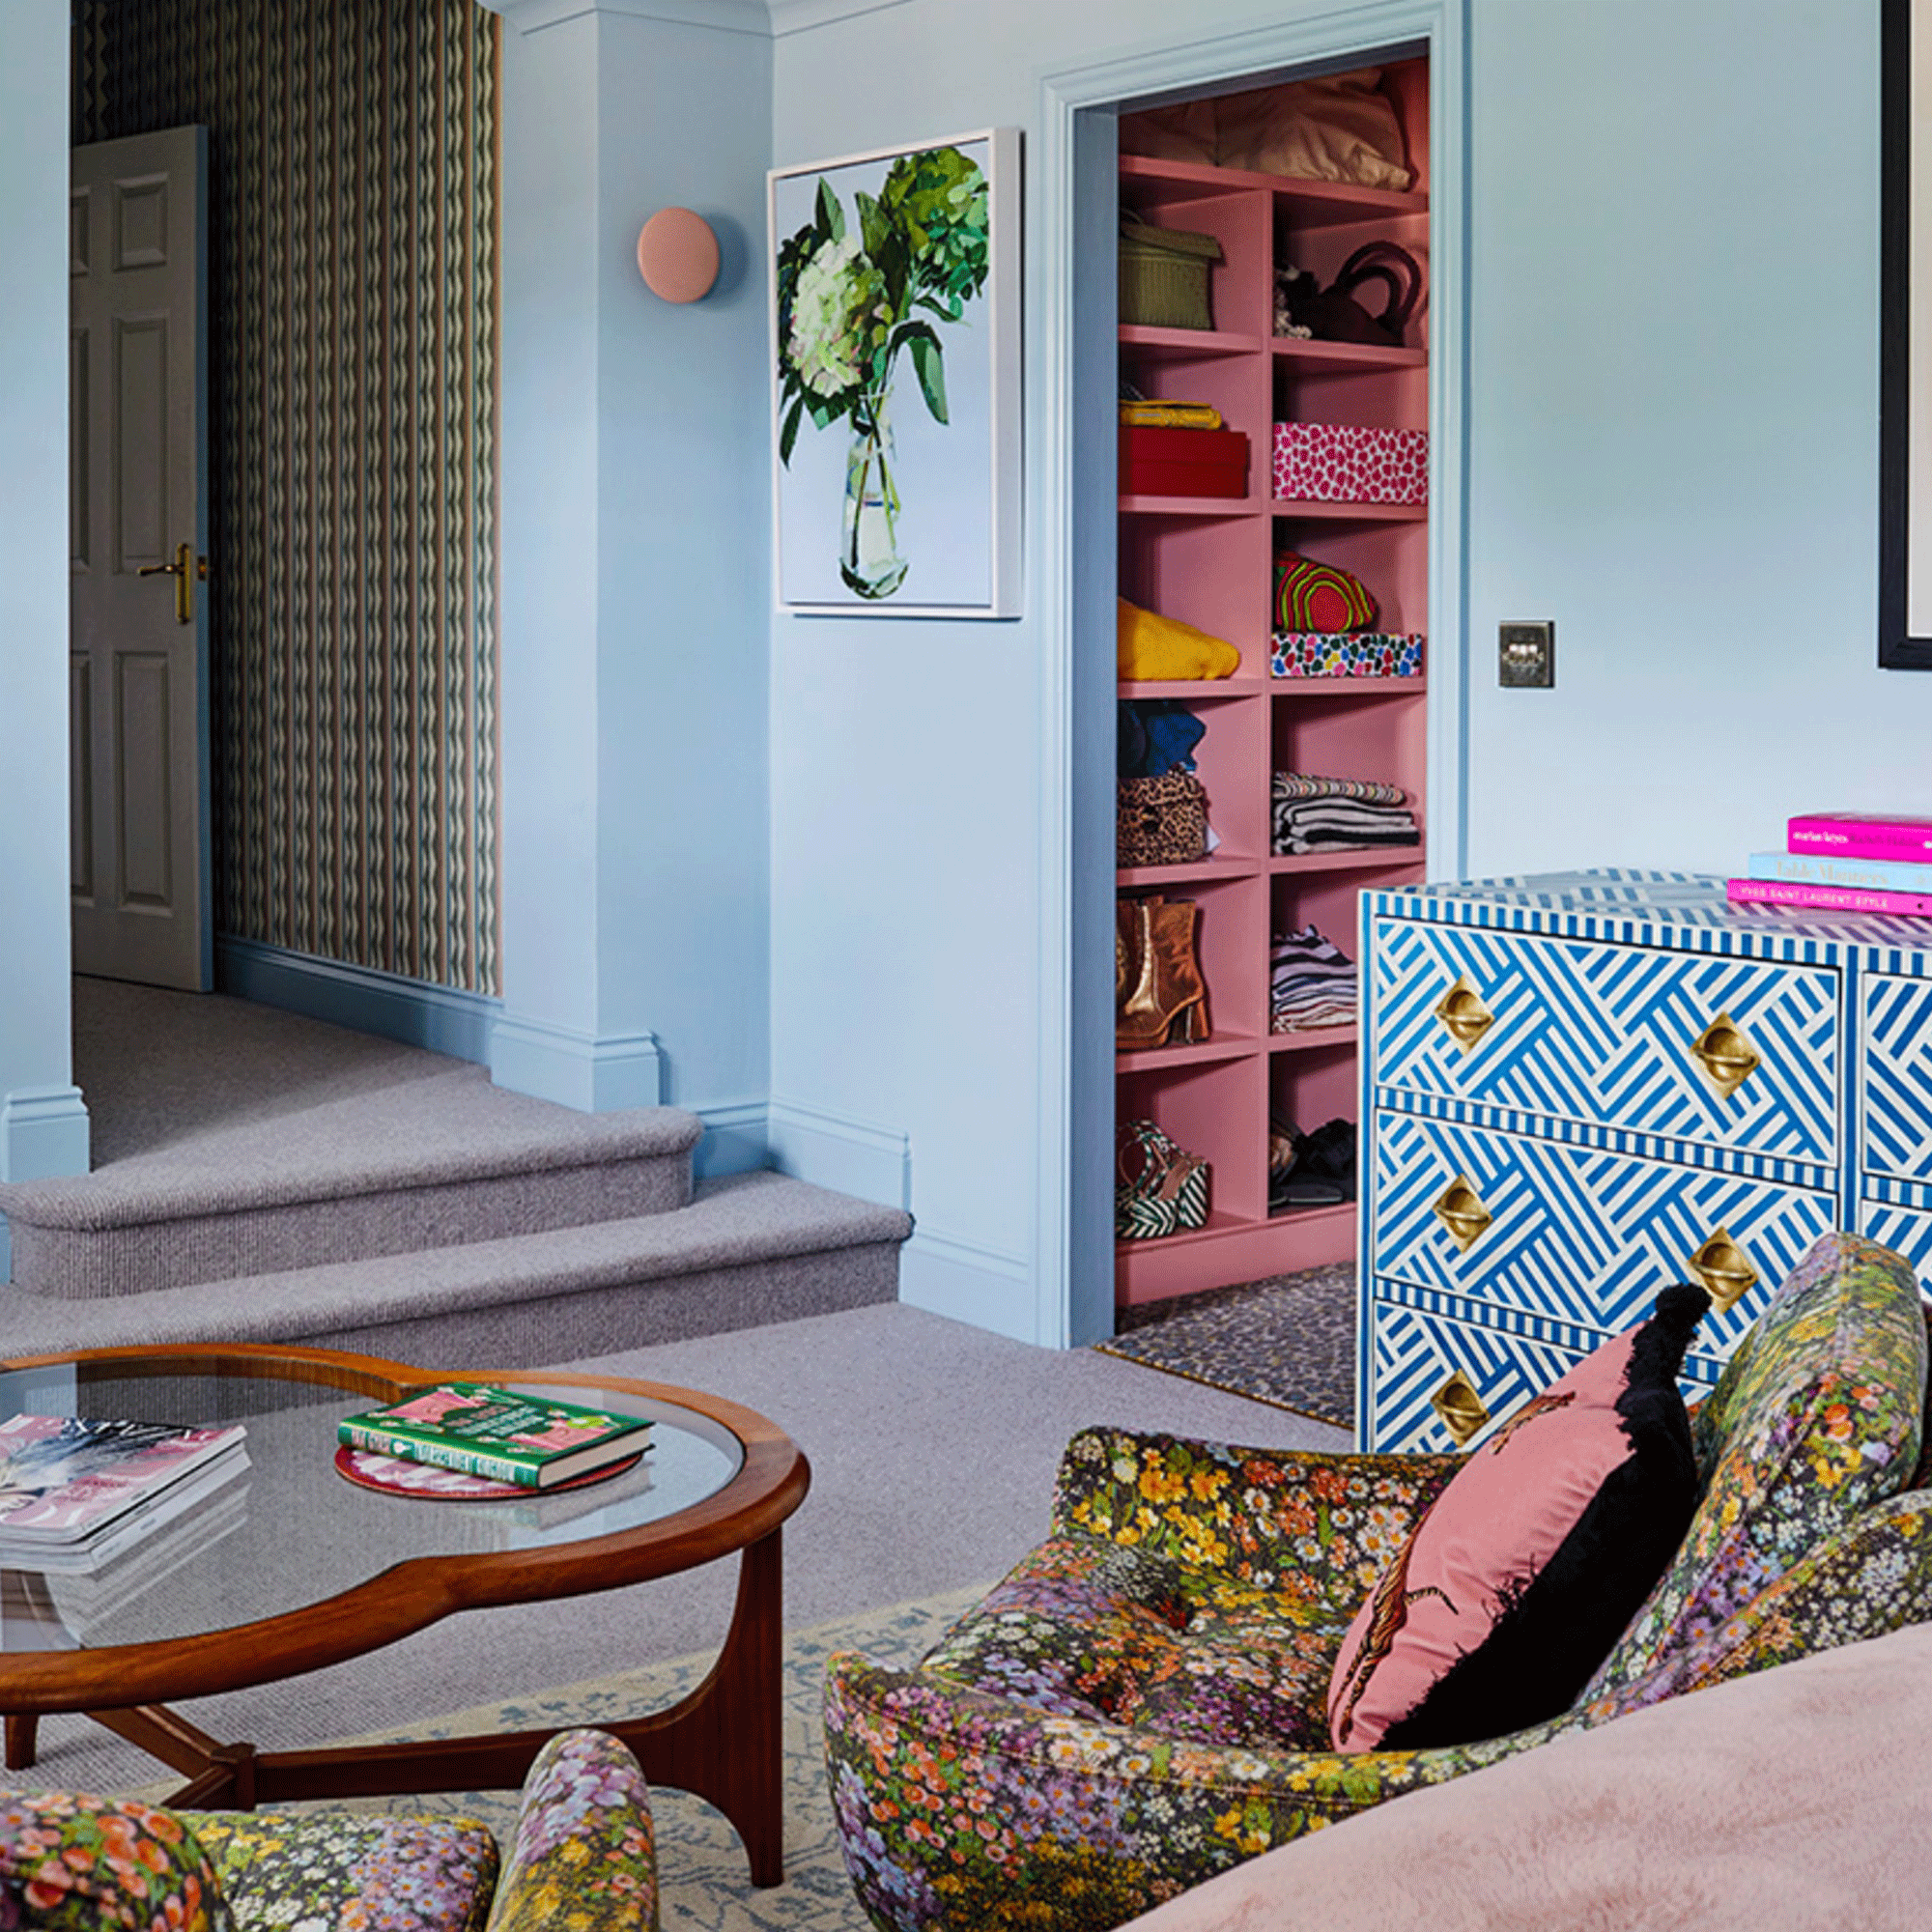 Blue room with pink shelves